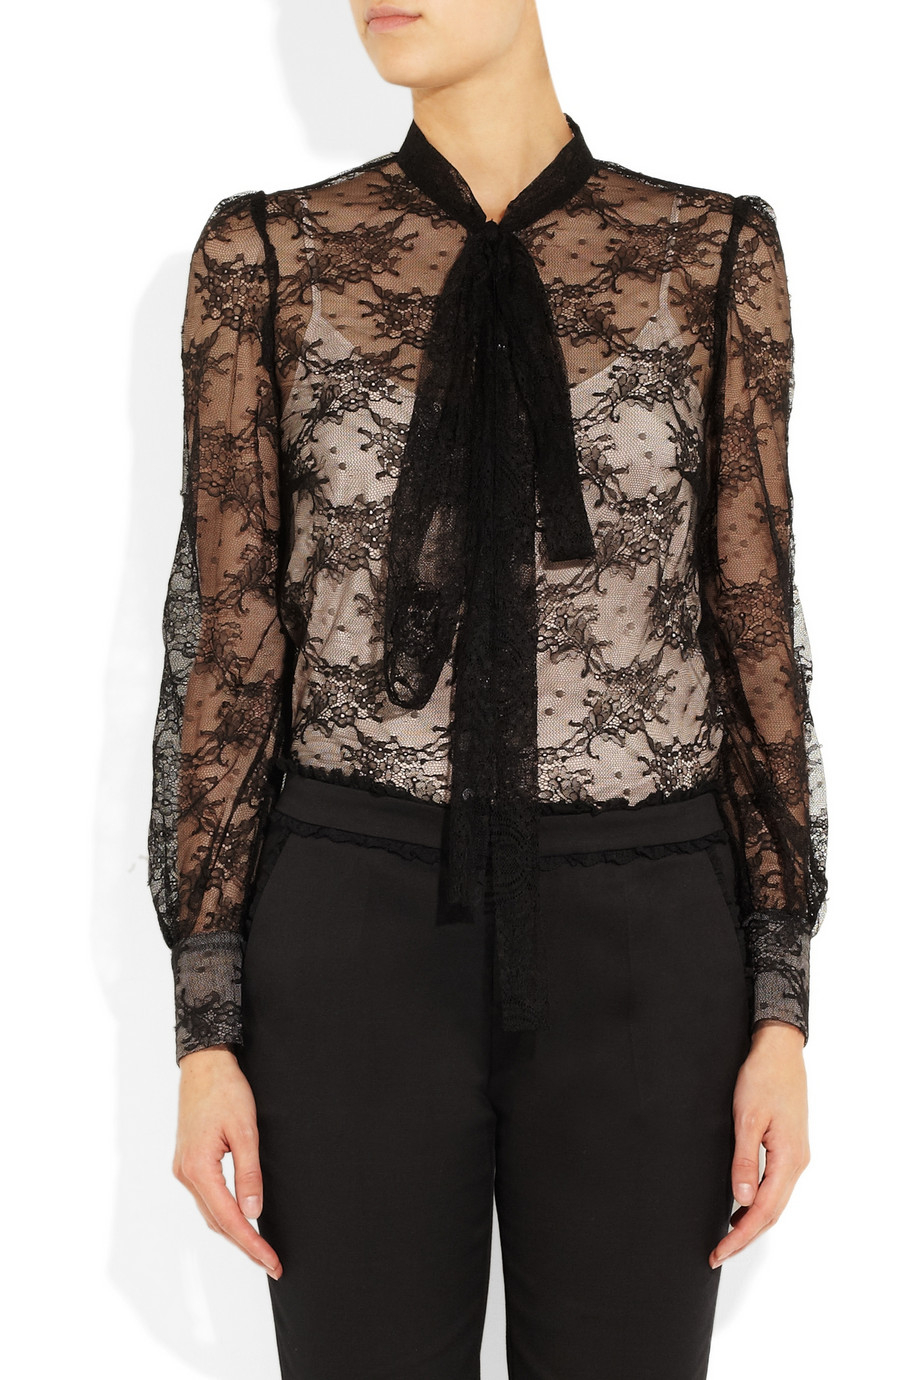 Lyst - Red Valentino Lace Blouse in Black